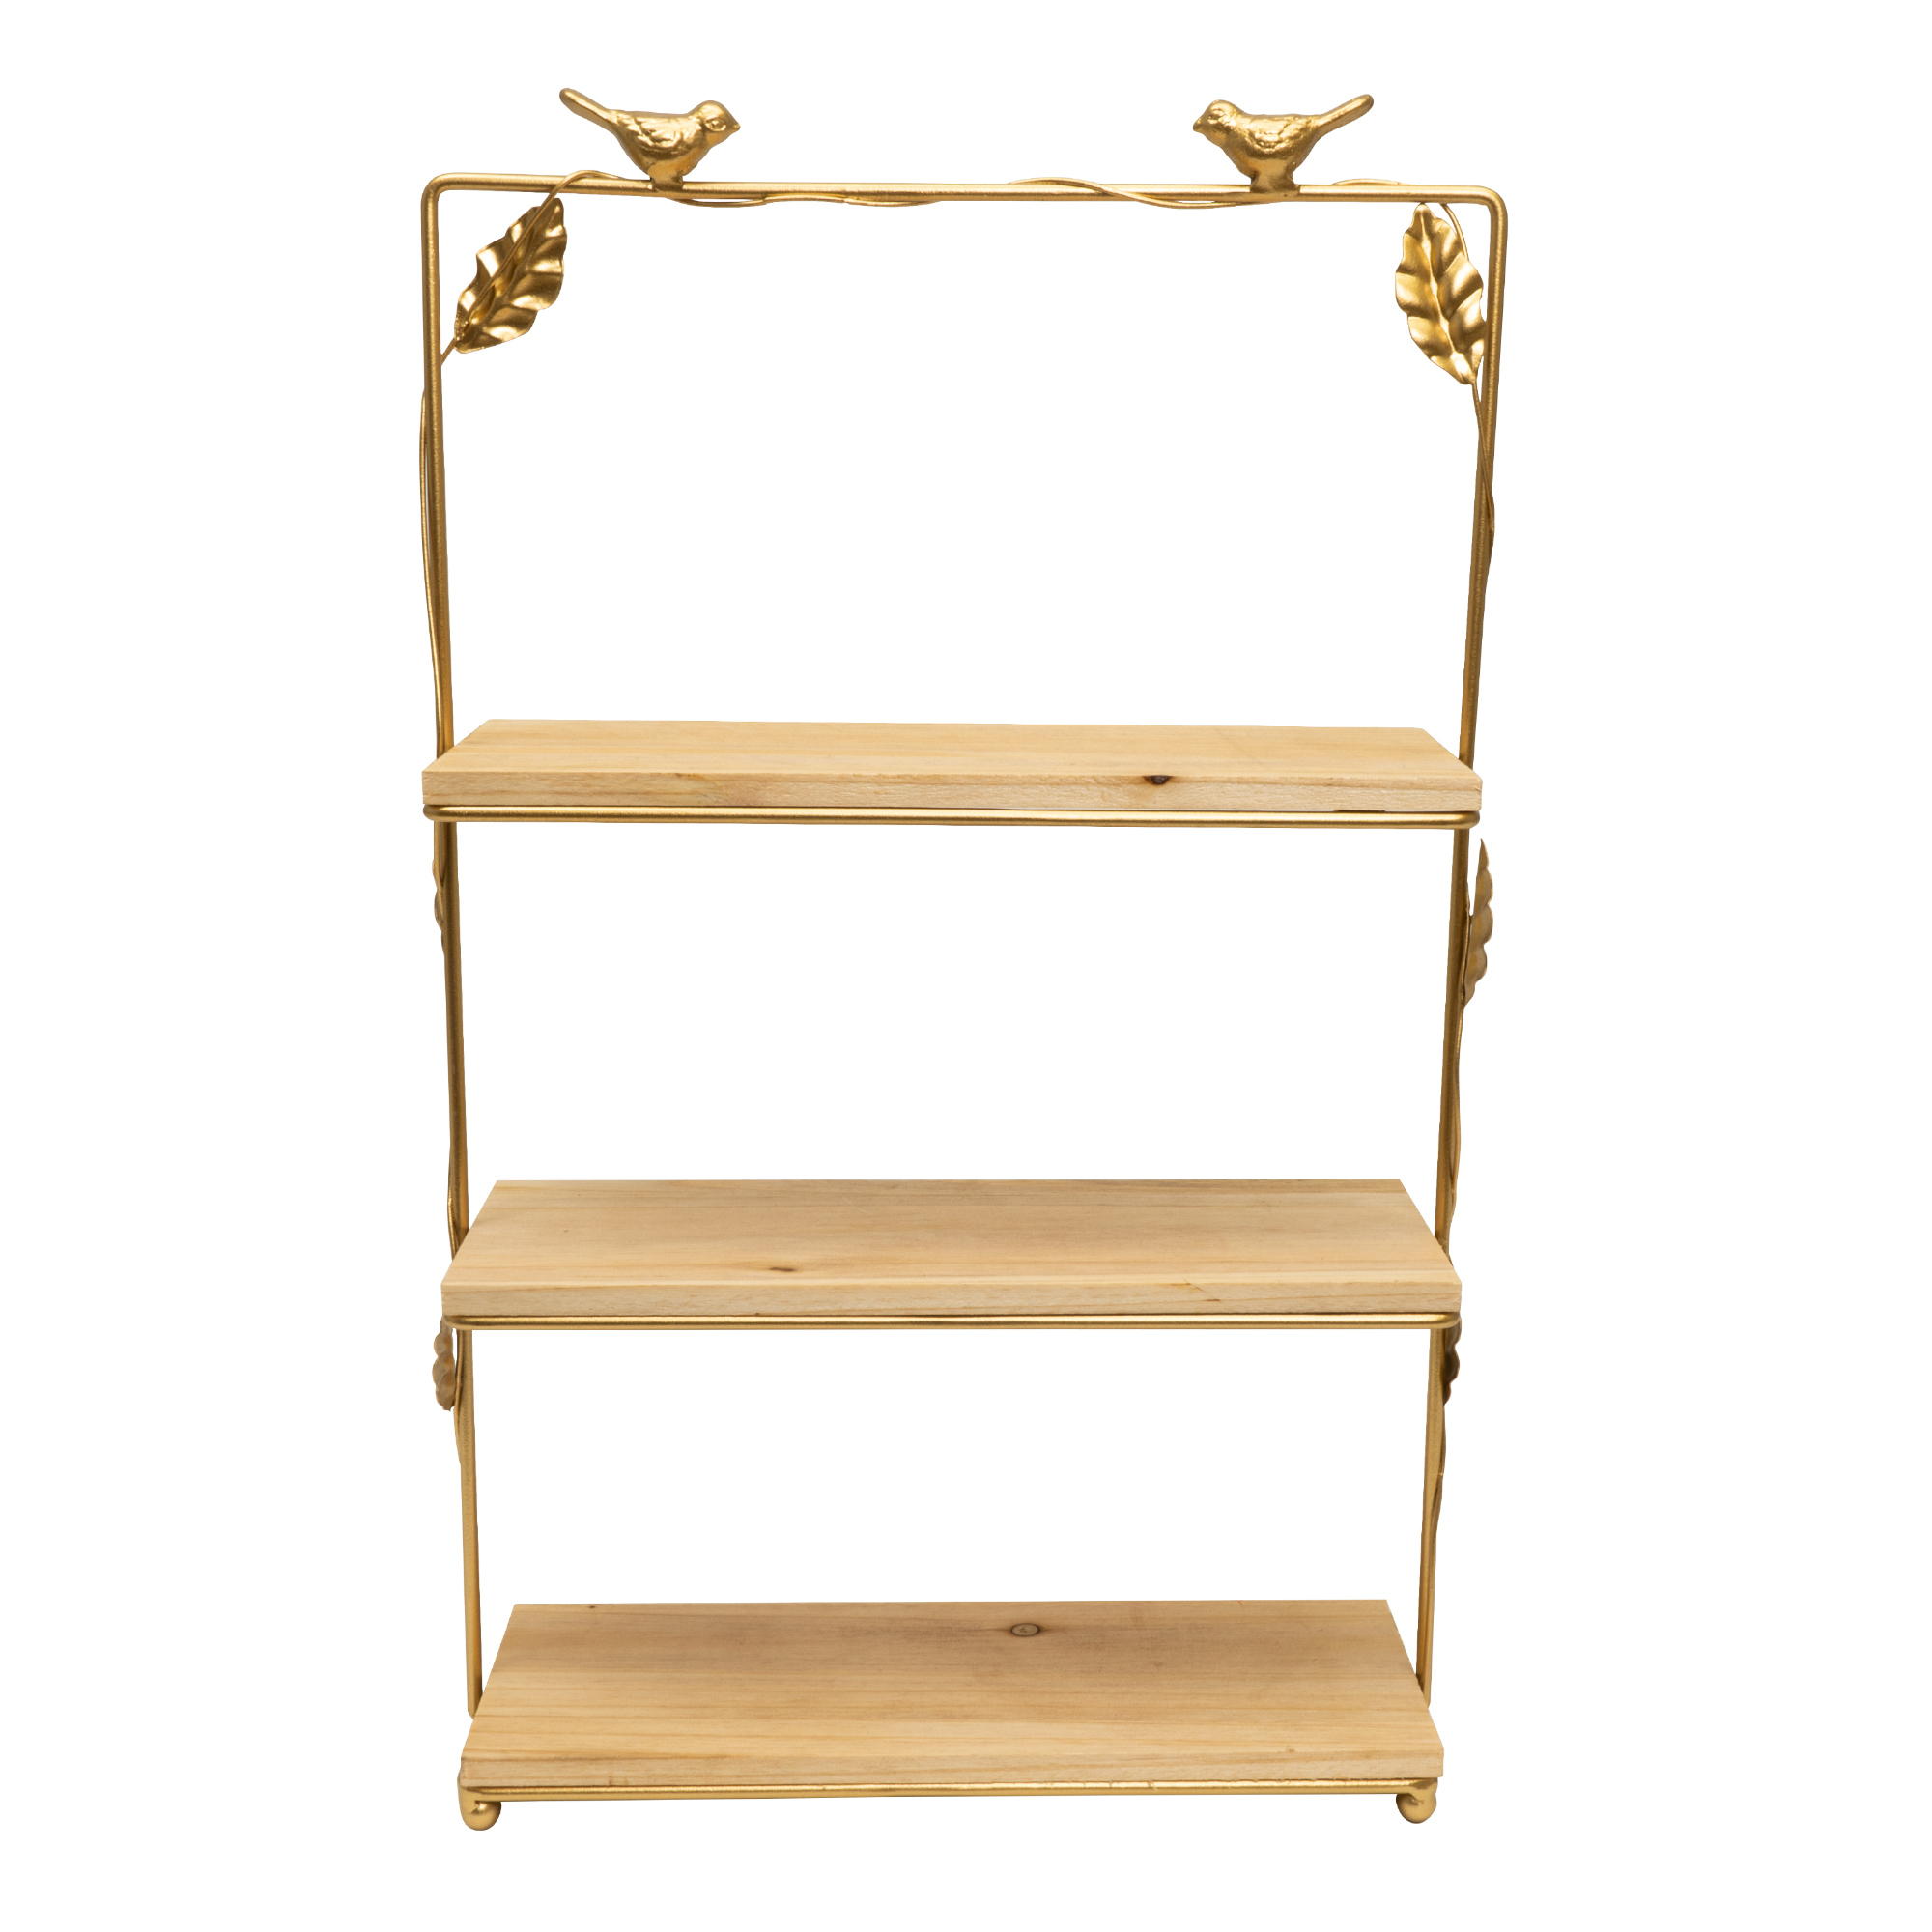 Metal 3 Tier Dessert Stand with Wood Panels - Gold